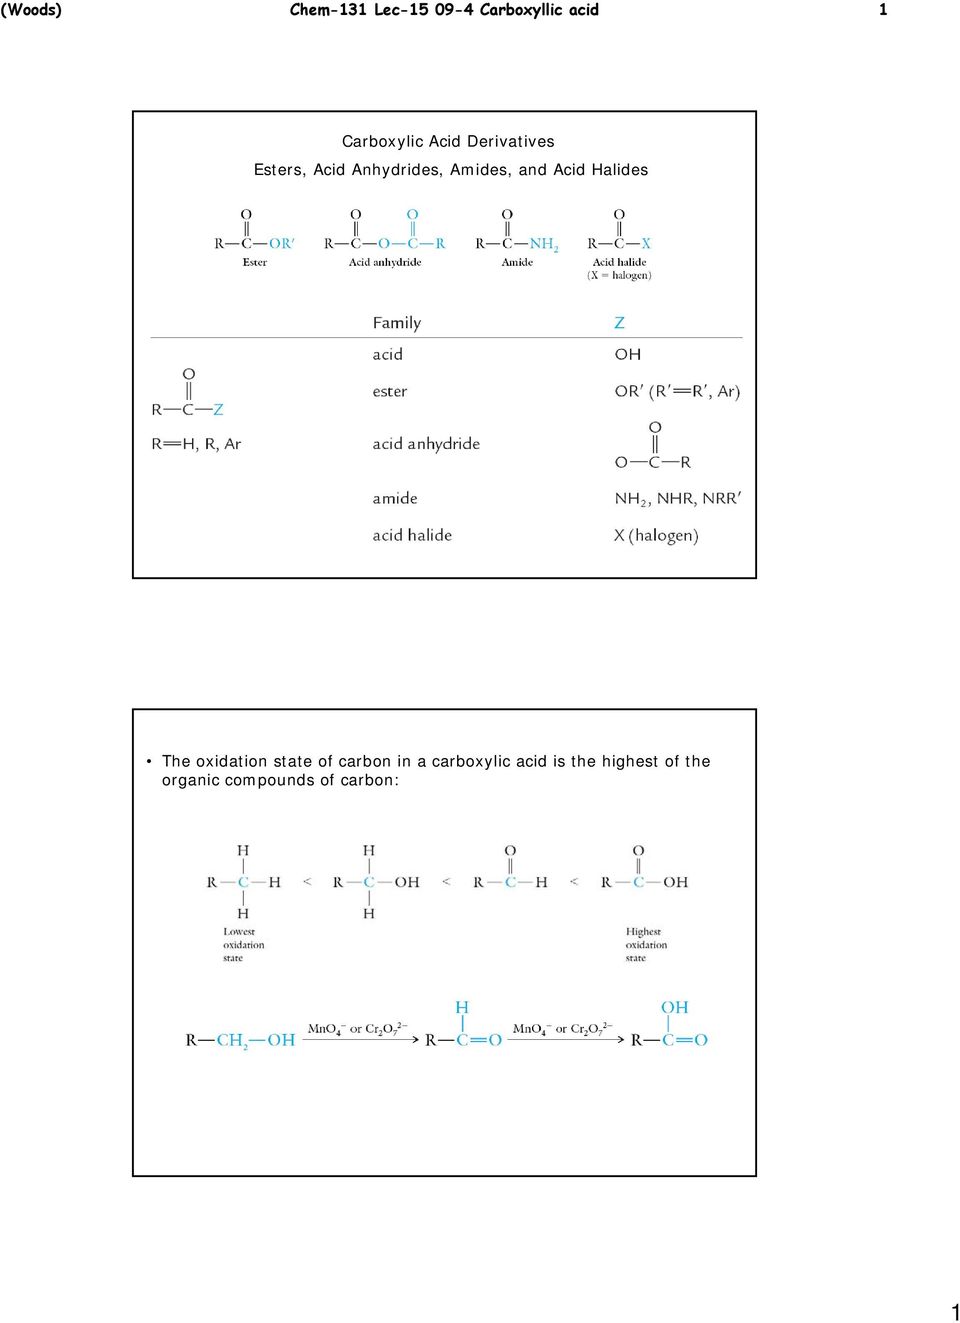 Amides, and Acid Halides The oxidation state of carbon in